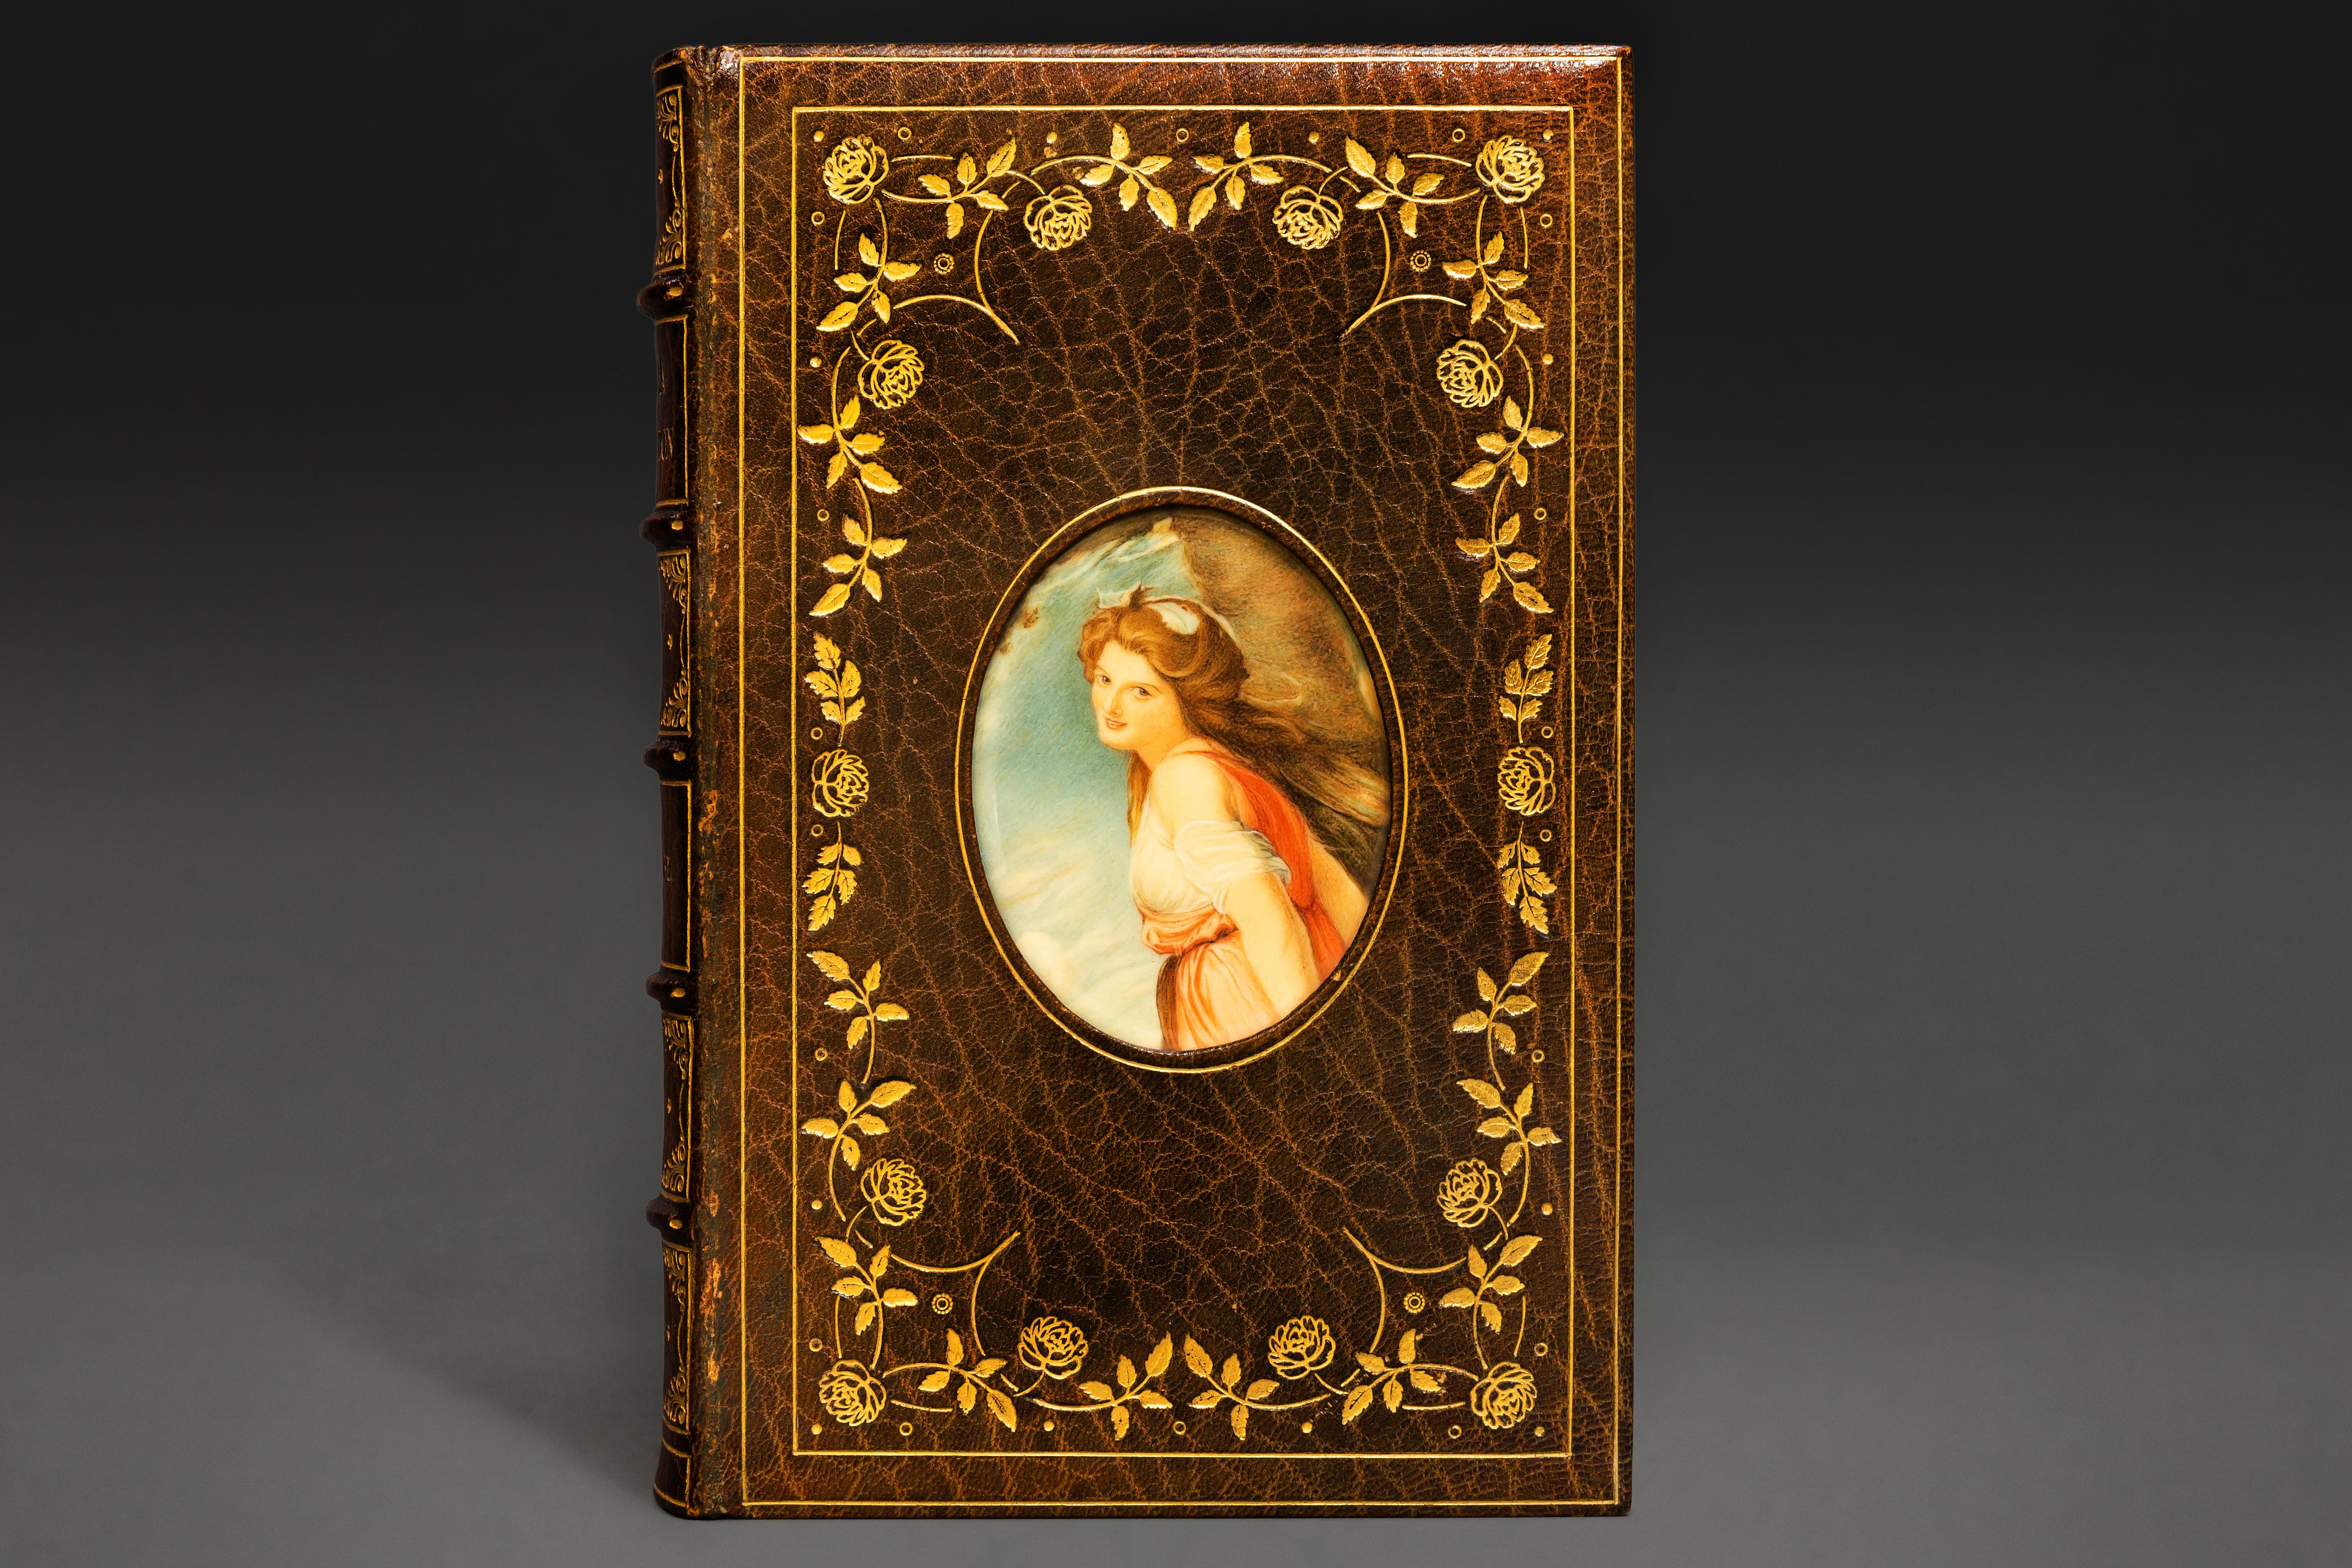 1 Volume. O.A. Sherrard, A Life of Emma Hamilton. Bound in full green morocco. Watercolor painting of Emma Hamilton under glass on front cover. All edges gilt. Raised bands. Gilt floral tooling on front cover. Linen endpapers. Bound by Bayntun and